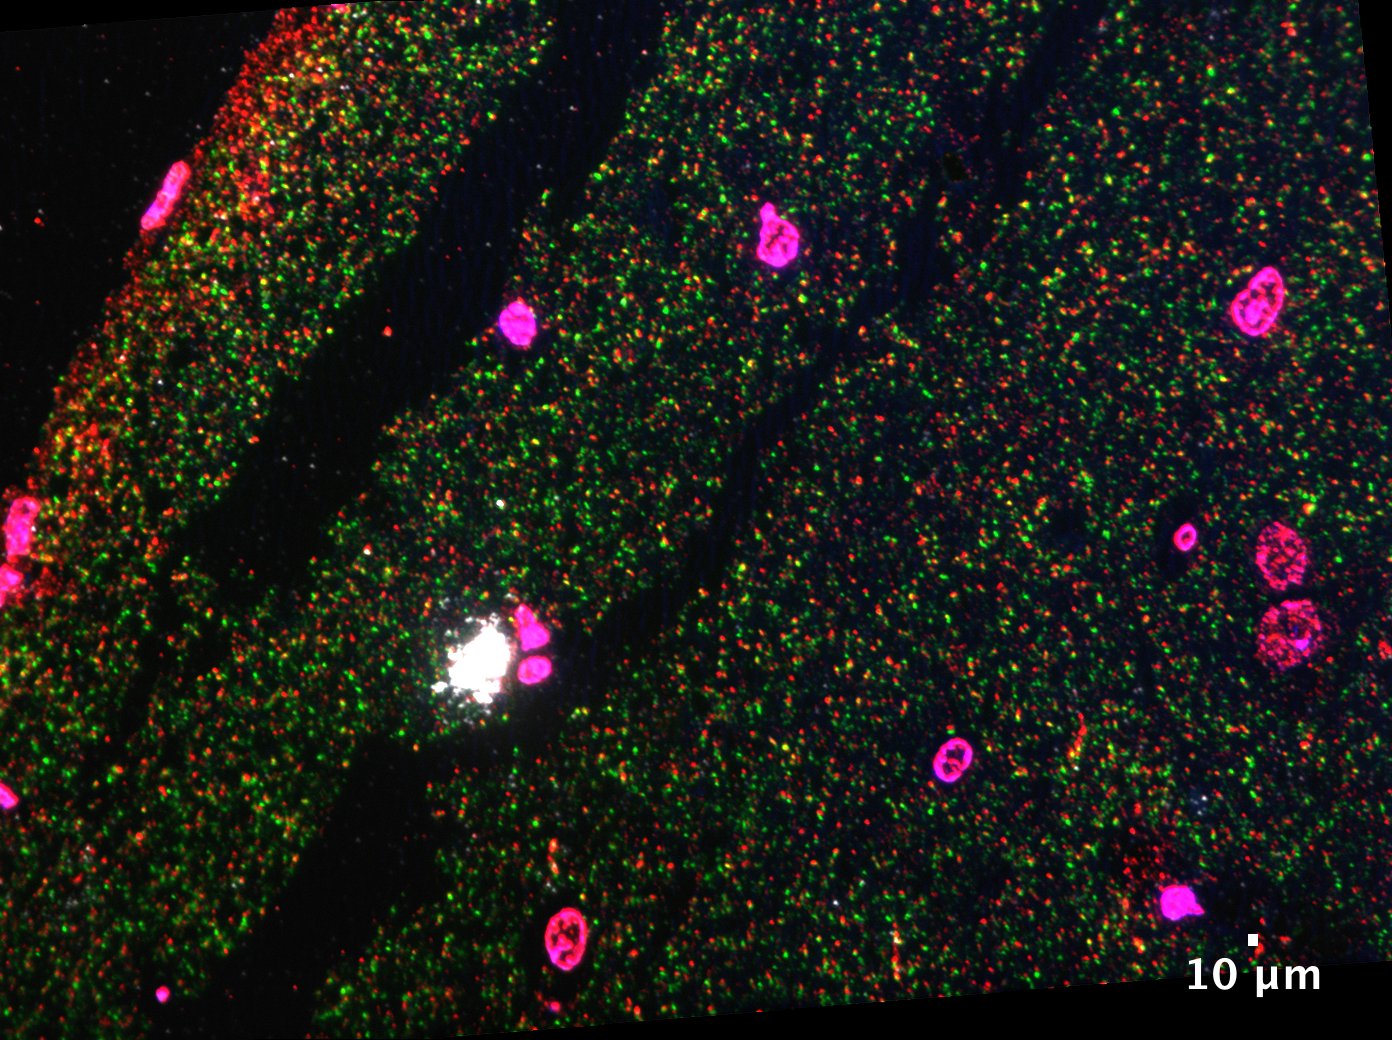 Figure 2. Hippocampal tissue from a mouse model of AD. Showing presynaptic protein synaptophysin (green) apposing postsynaptic P